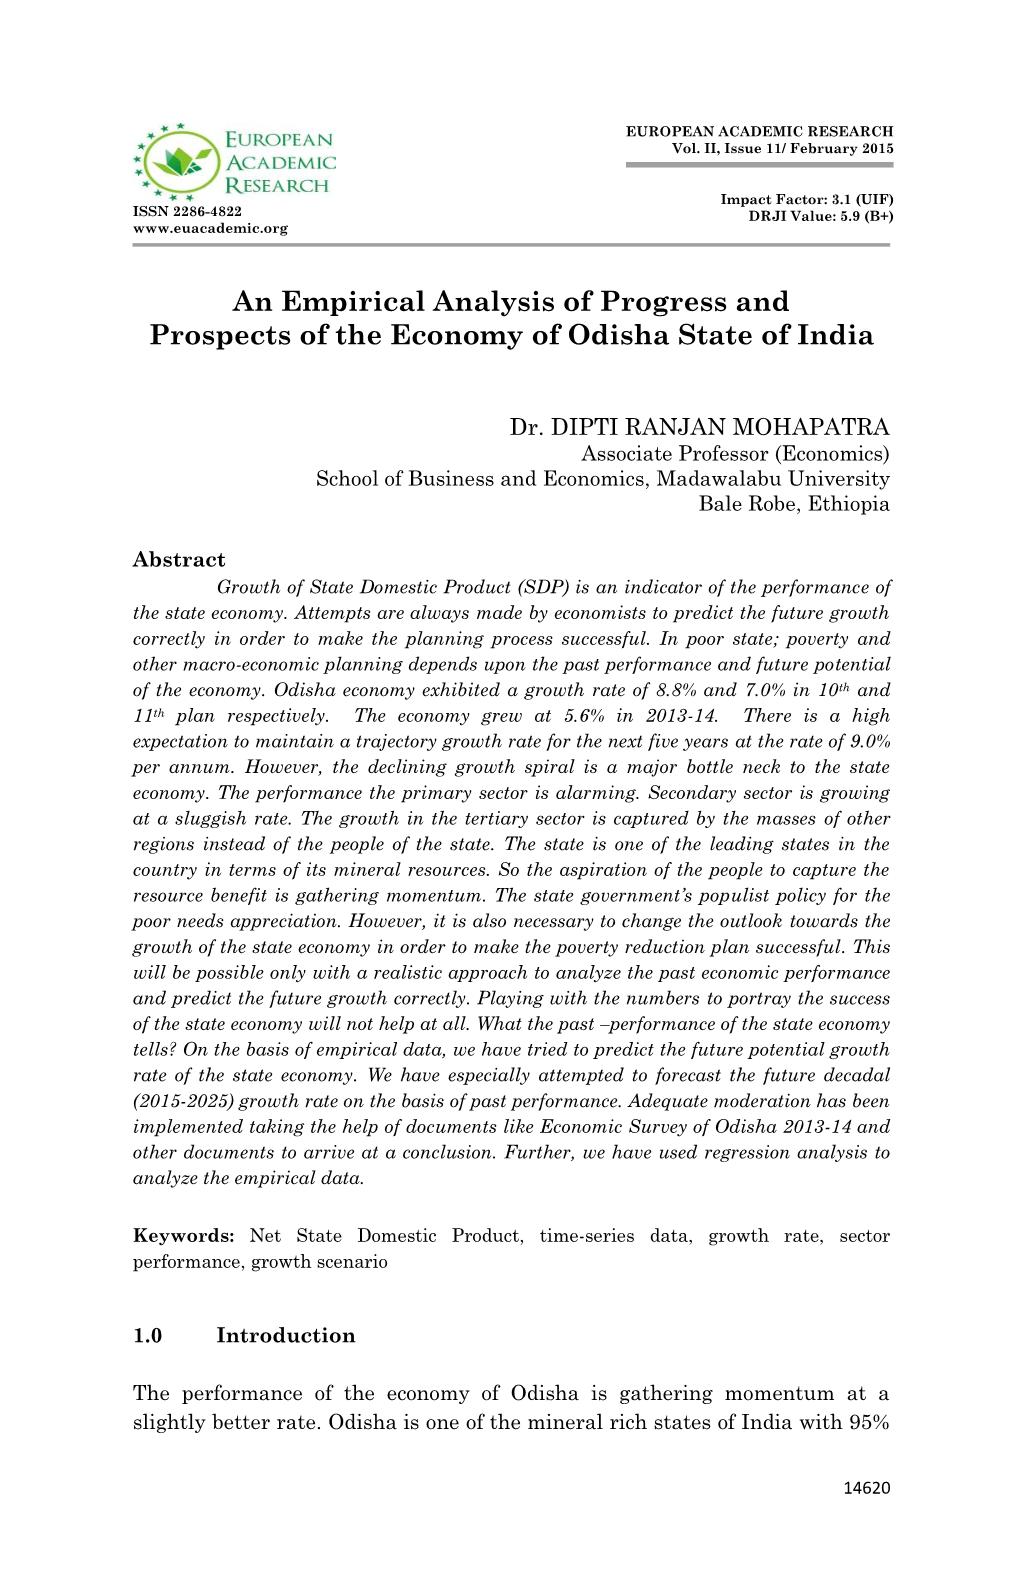 An Empirical Analysis of Progress and Prospects of the Economy of Odisha State of India